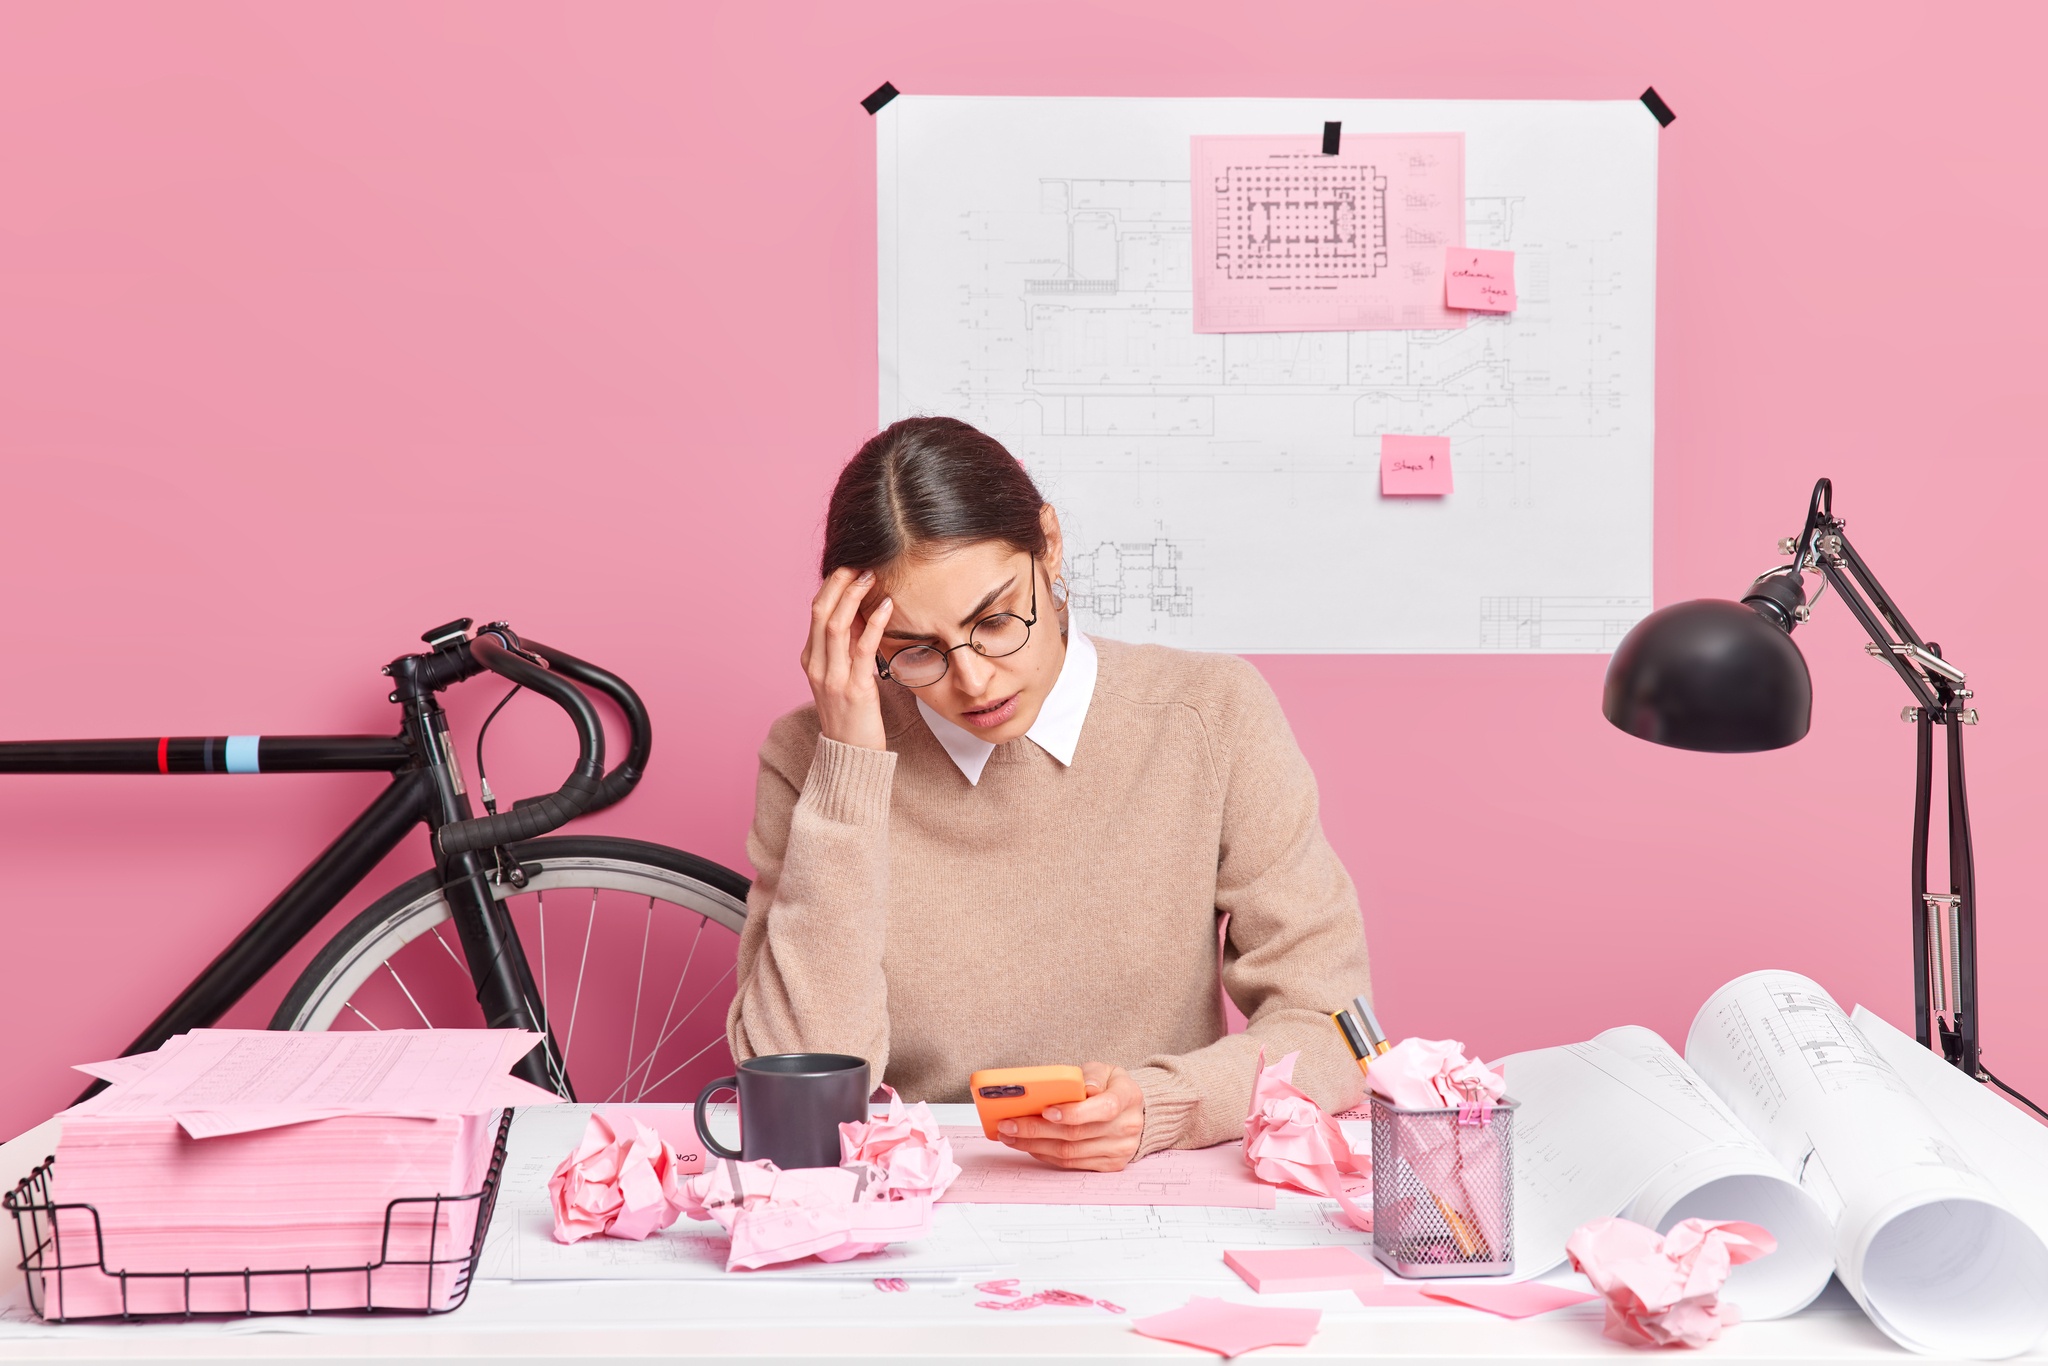 D'Aura overworked tired female architect focused smartphone has much work works architectural project makes sketches draws sketches poses coworking space against pink wall office worker 2